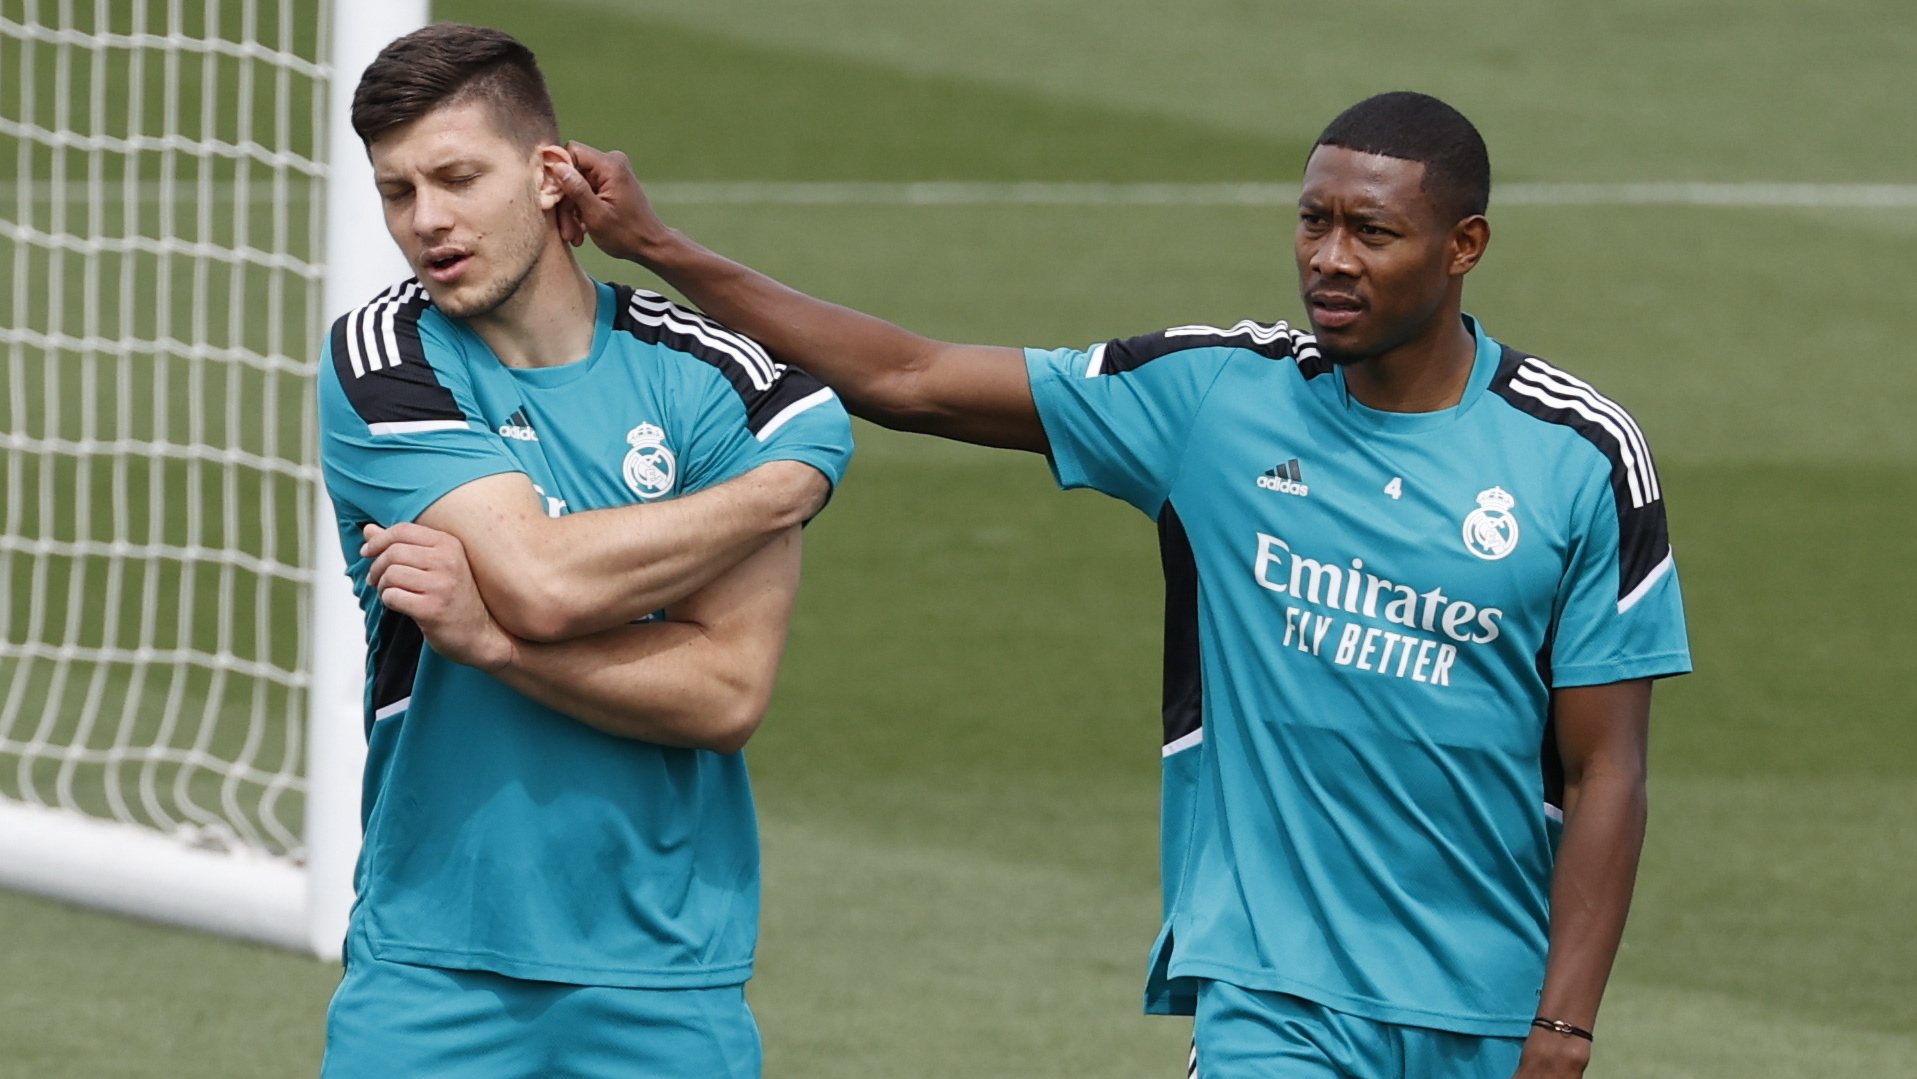 epa09971506 Real Madrid players Luka Jovic (L) and David Alaba (R) attend their team&#039;s training session at Valdebebas&#039; Sports City, near Madrid, Spain, 24 May 2022. Real Madrid will face Liverpool FC in their UEFA Champions League final on 28 May 2022 in Saint-Denis, near Paris, France.  EPA/JUAN CARLOS HIDALGO